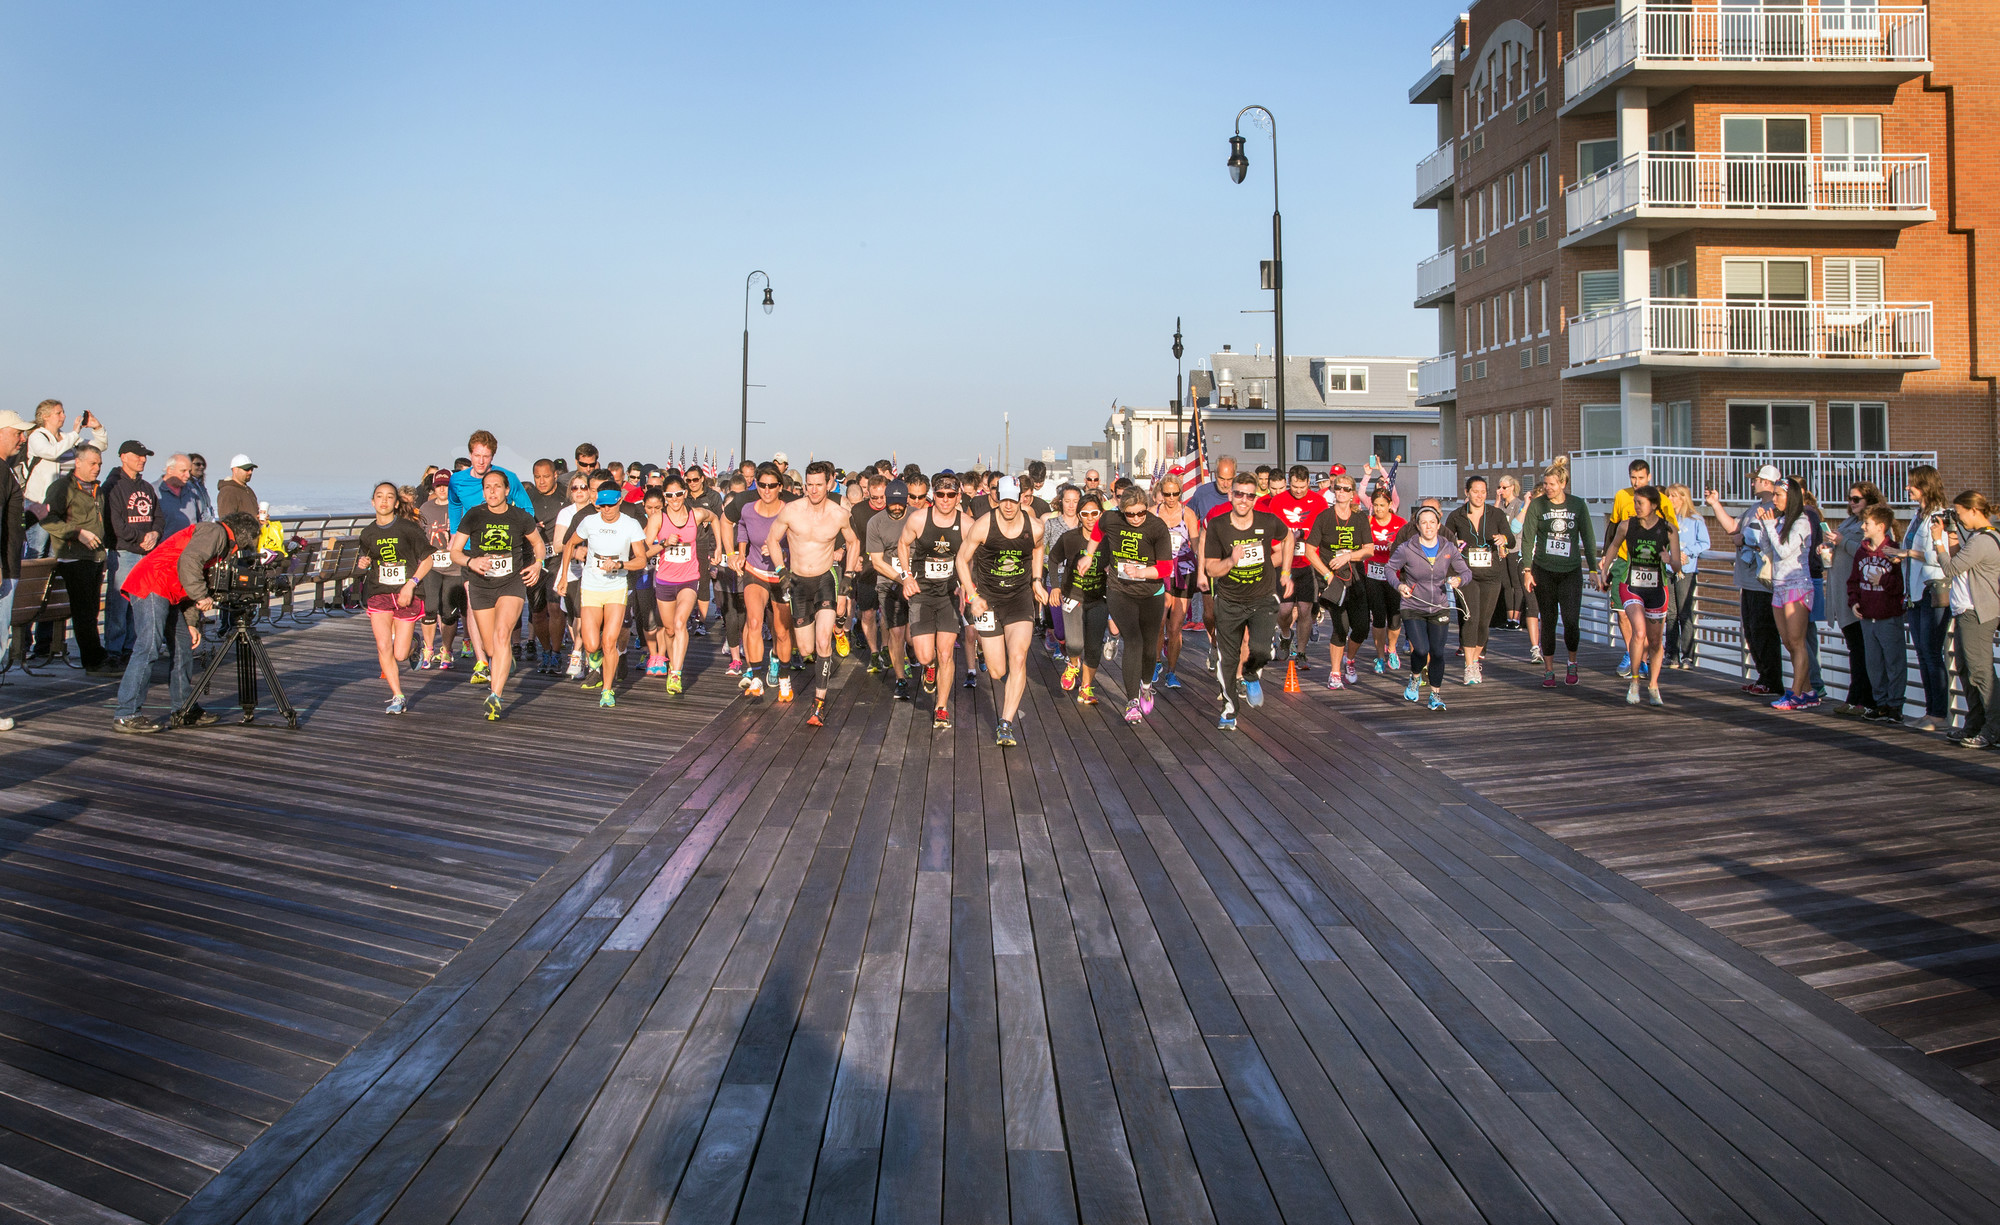 Hundreds of runners lined up on the boardwalk at the start of last Saturday’s Run, Ride, Rebuild event, a 5K and duathlon, whose participants helped raise money for storm relief efforts and volunteered to rebuild the homes of two Long Beach residents.